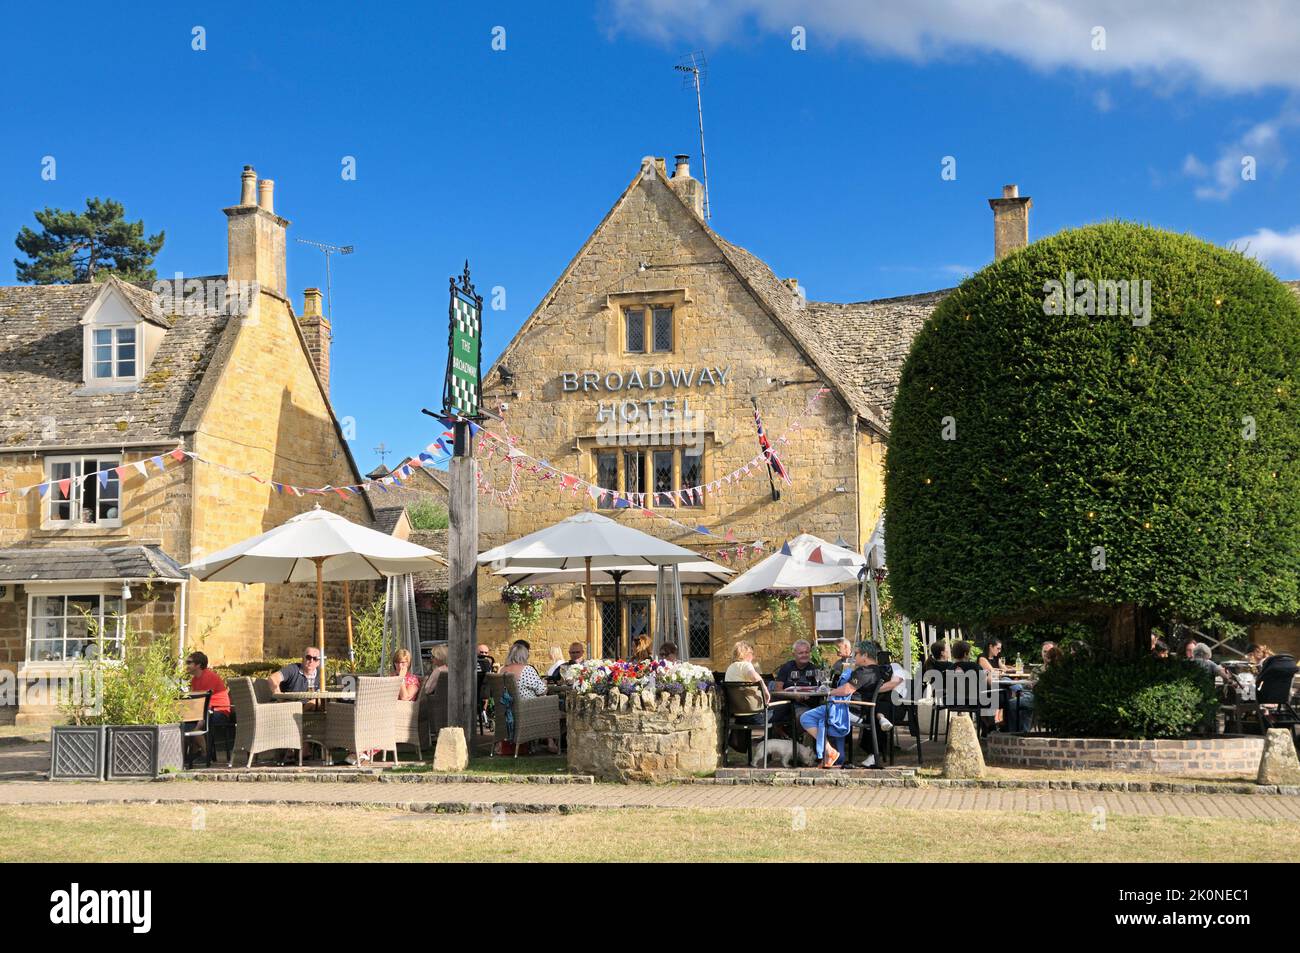 The Broadway Hotel, High Street, Broadway, Cotswolds, Worcestershire, Inghilterra, Regno Unito Foto Stock